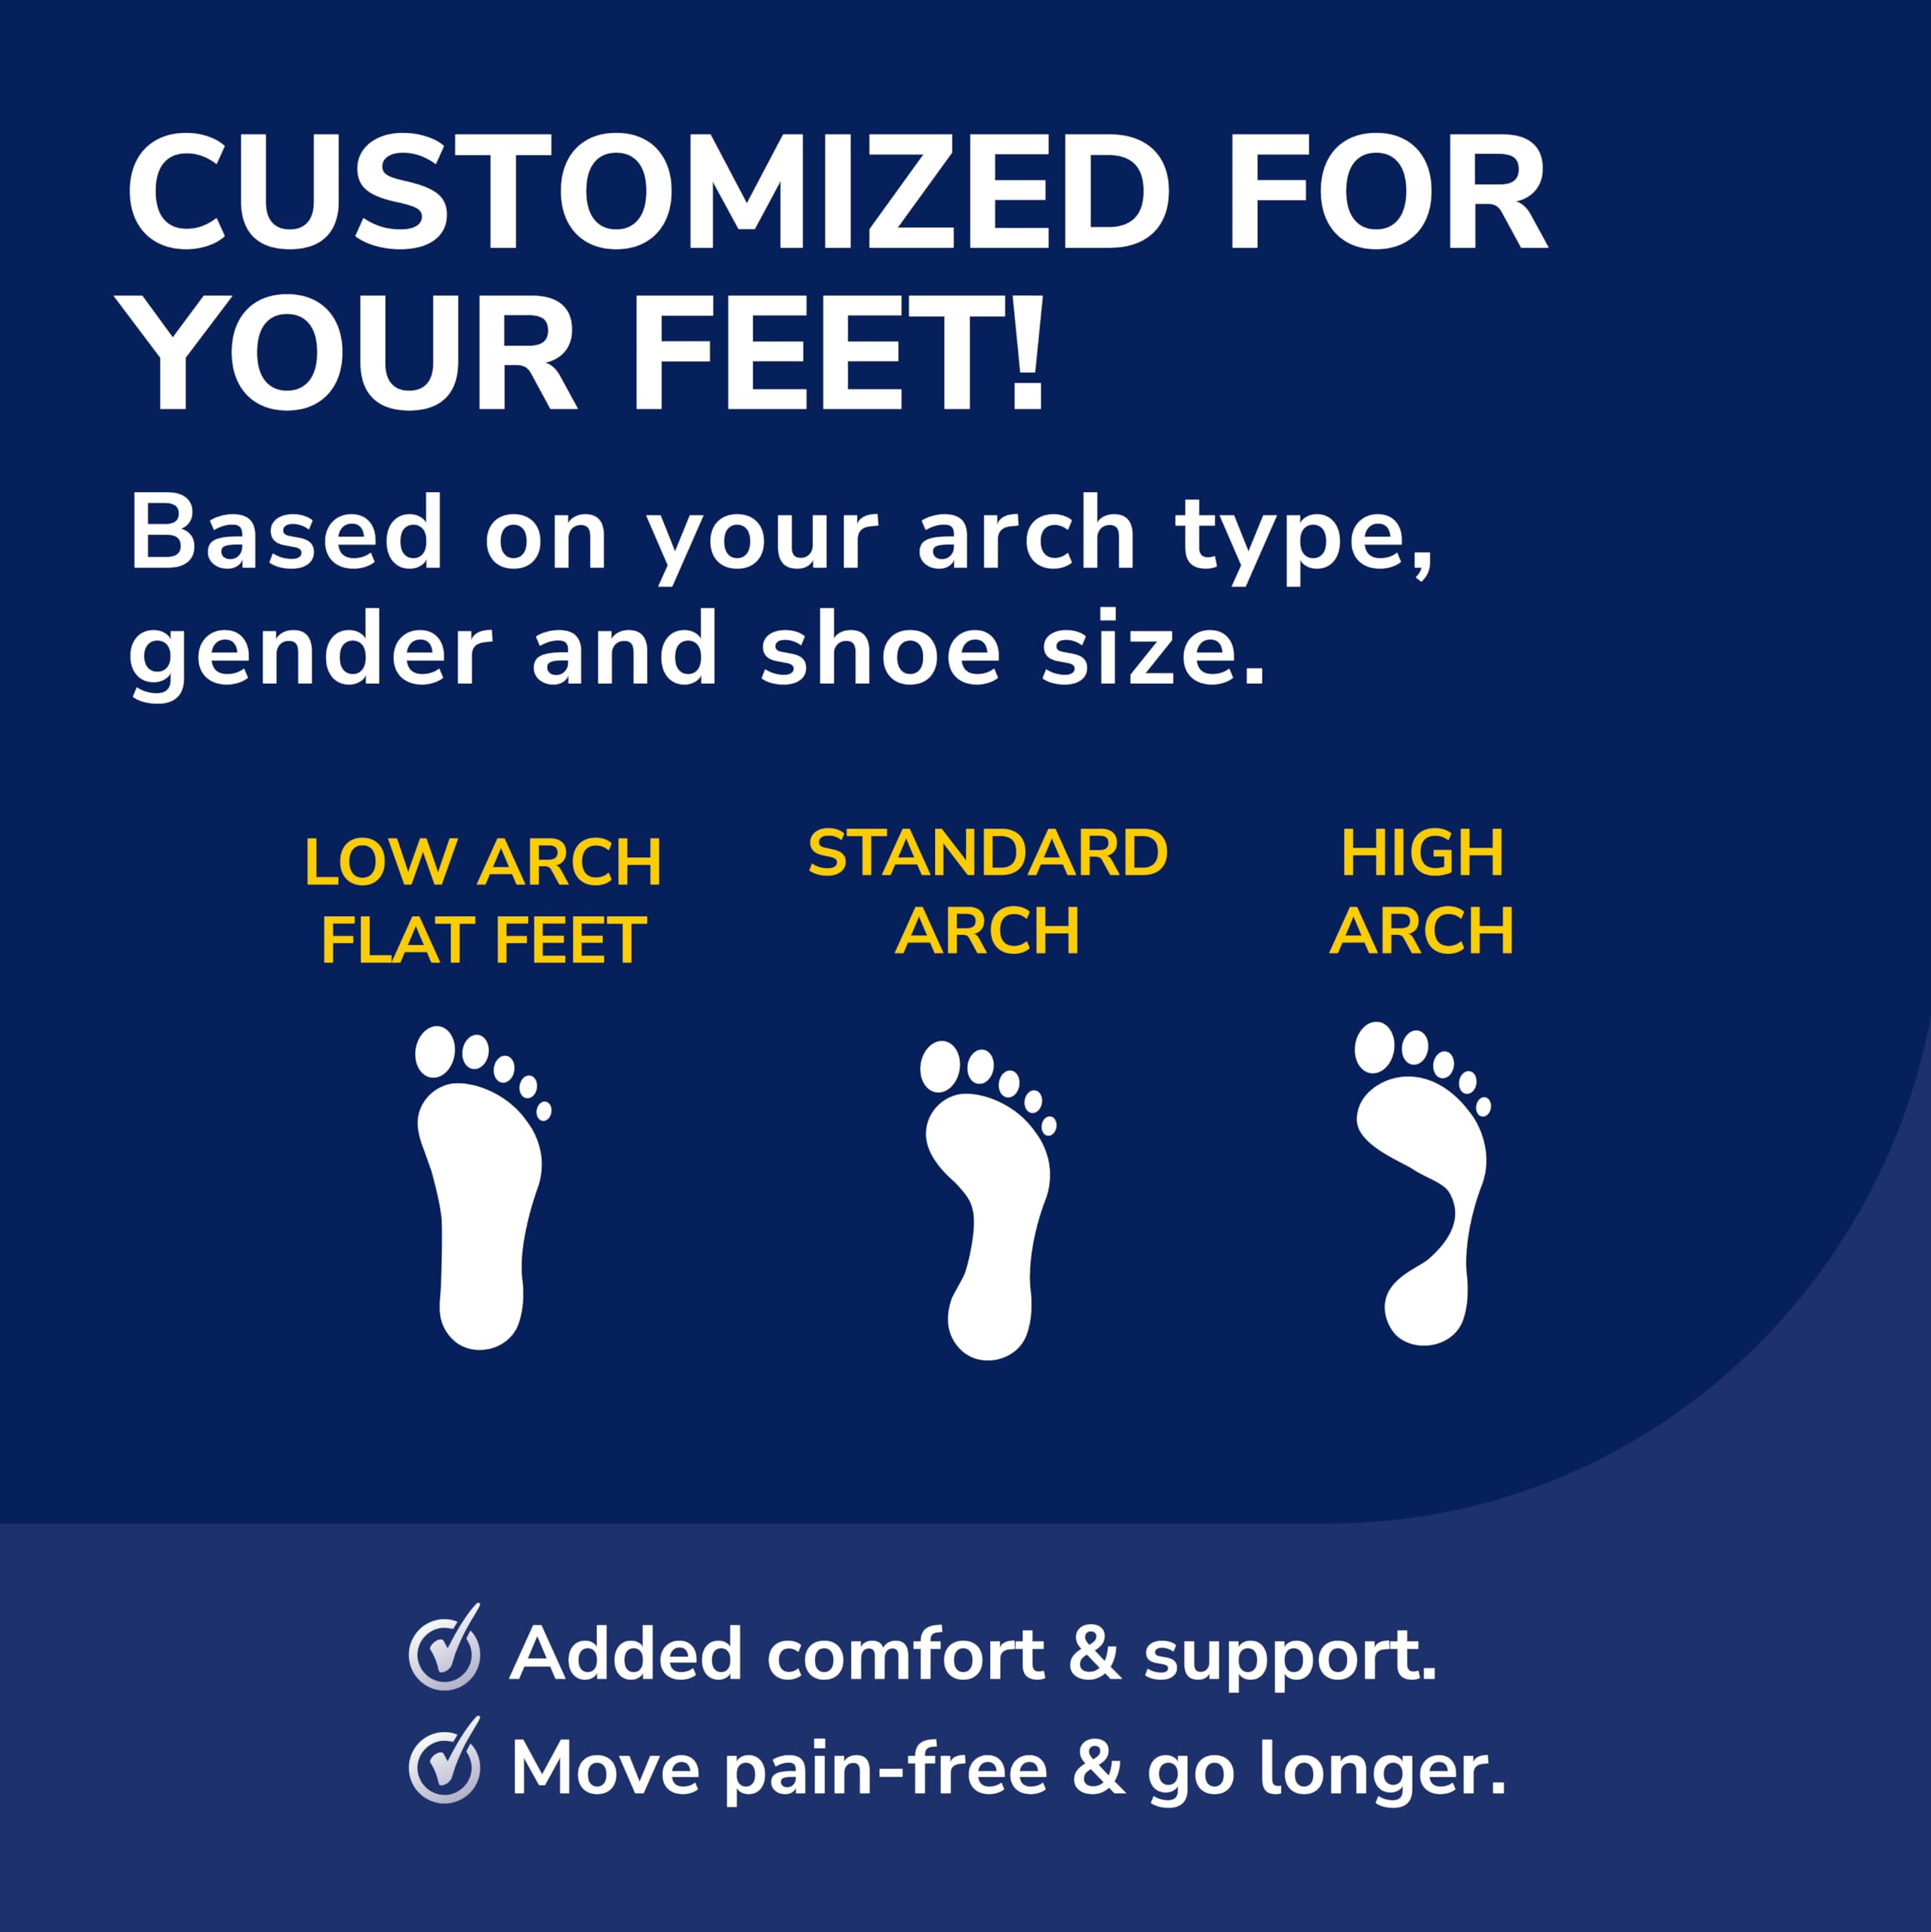 Dr. Scholl’s Custom Fit Orthotics 3/4 Length Inserts, CF 680, Customized for Your Foot & Arch, Immediate All-Day Pain Relief, Lower Back, Knee, Plantar Fascia, Heel, Insoles Fit Men & Womens Shoes